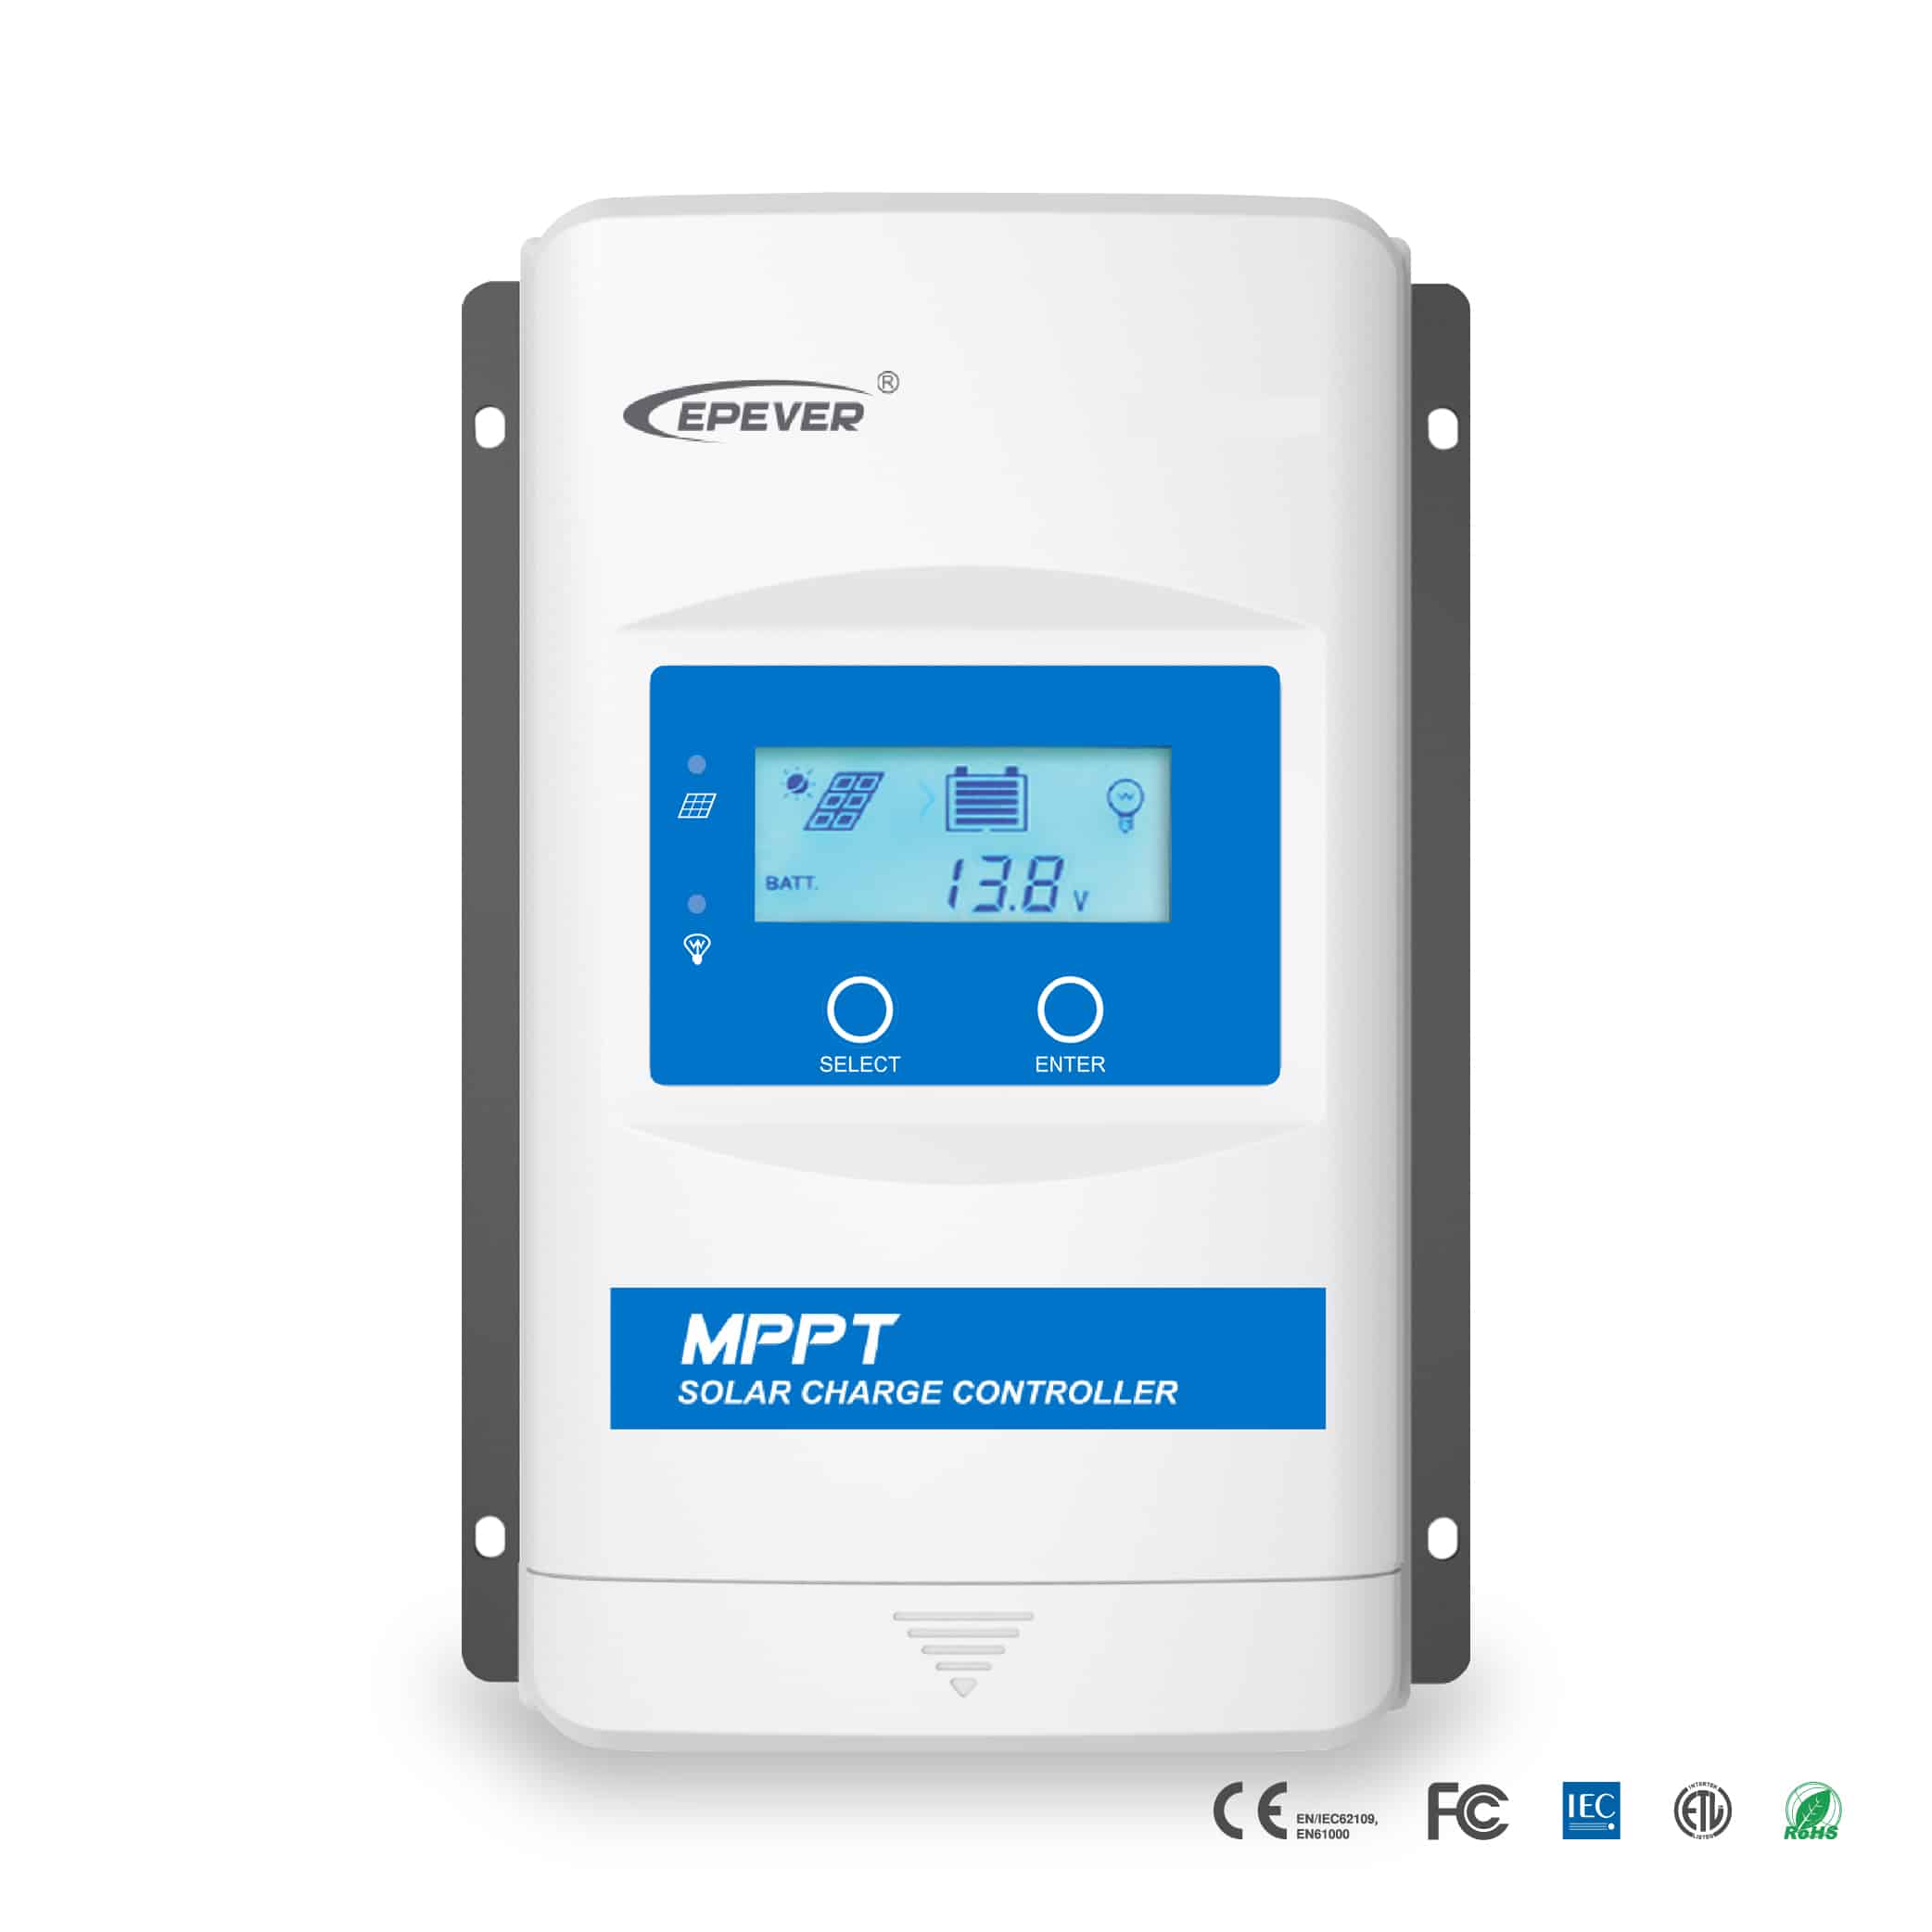 XTRA Series MPPT Solar Charge Controller - EPEVER